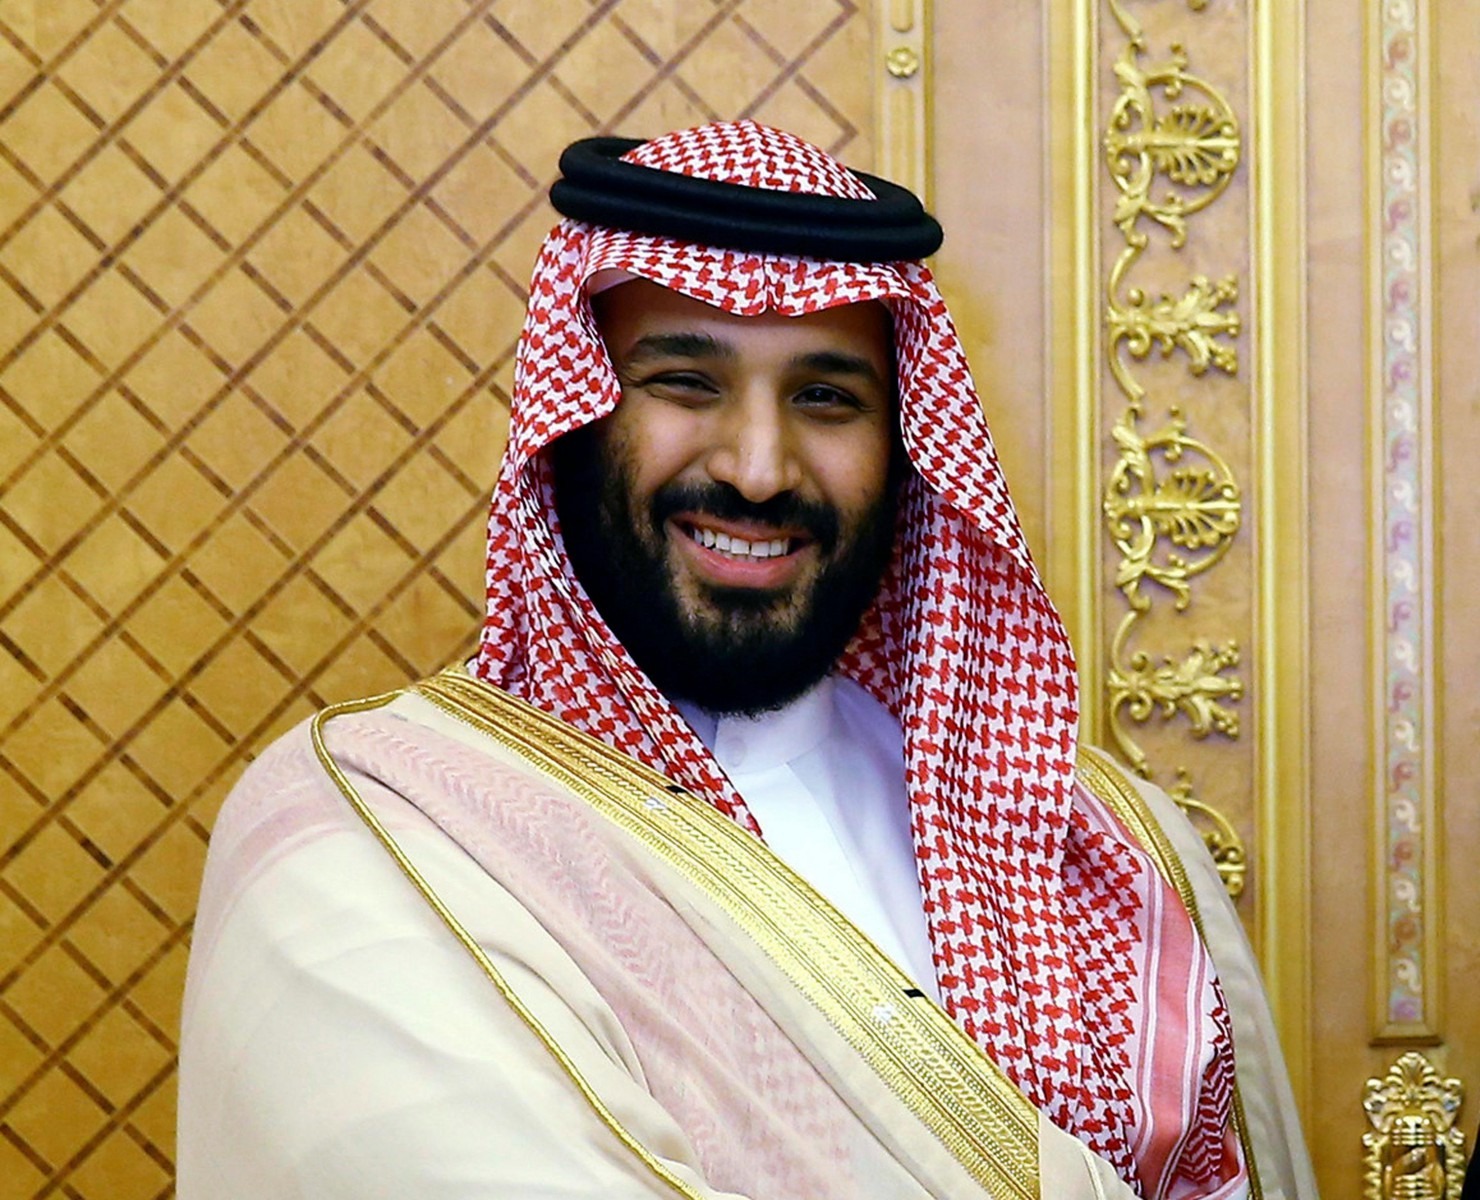 , Man Utd potential buyer Mohammed bin Salman is pals with Donald Trump and owns worlds most expensive home